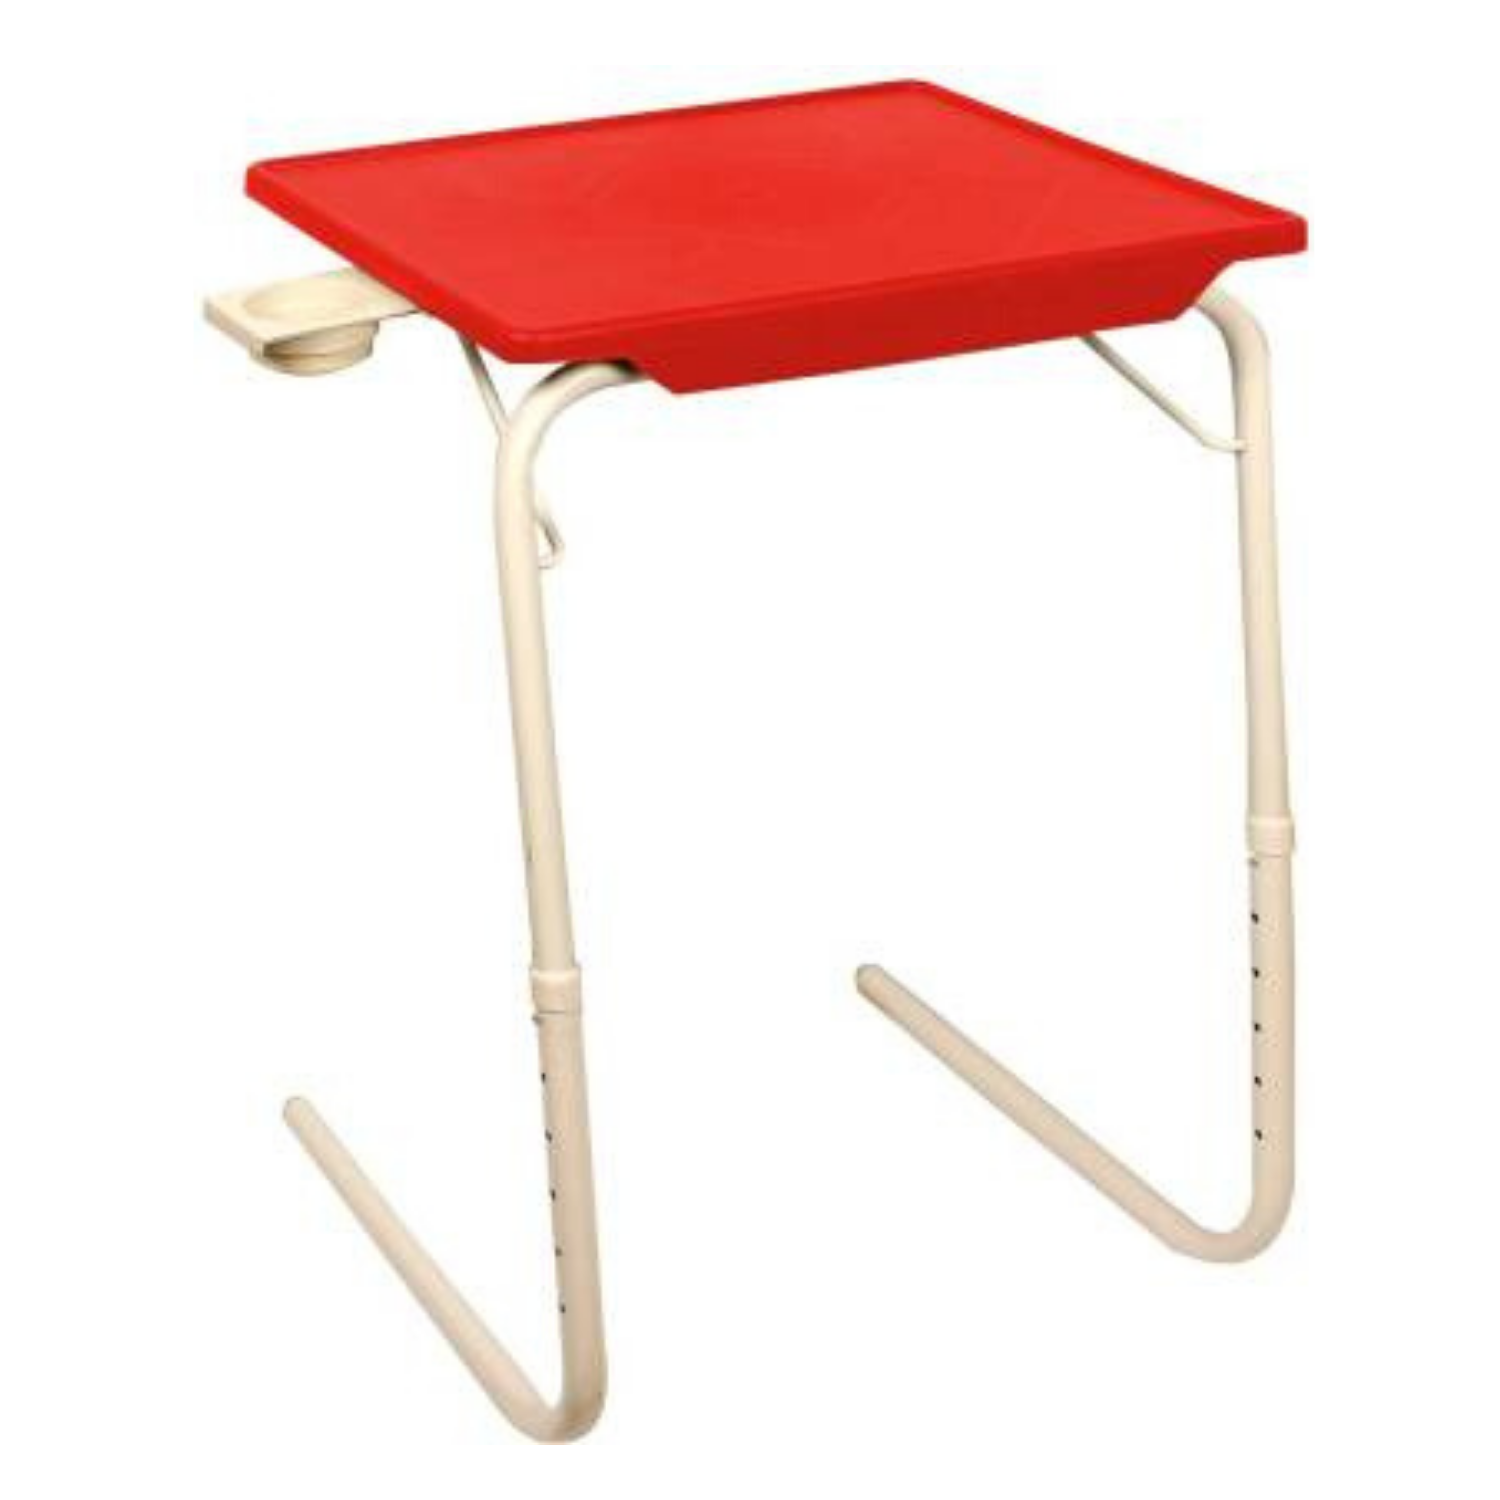  Multi utility Table mate Red with White legs | Wudore